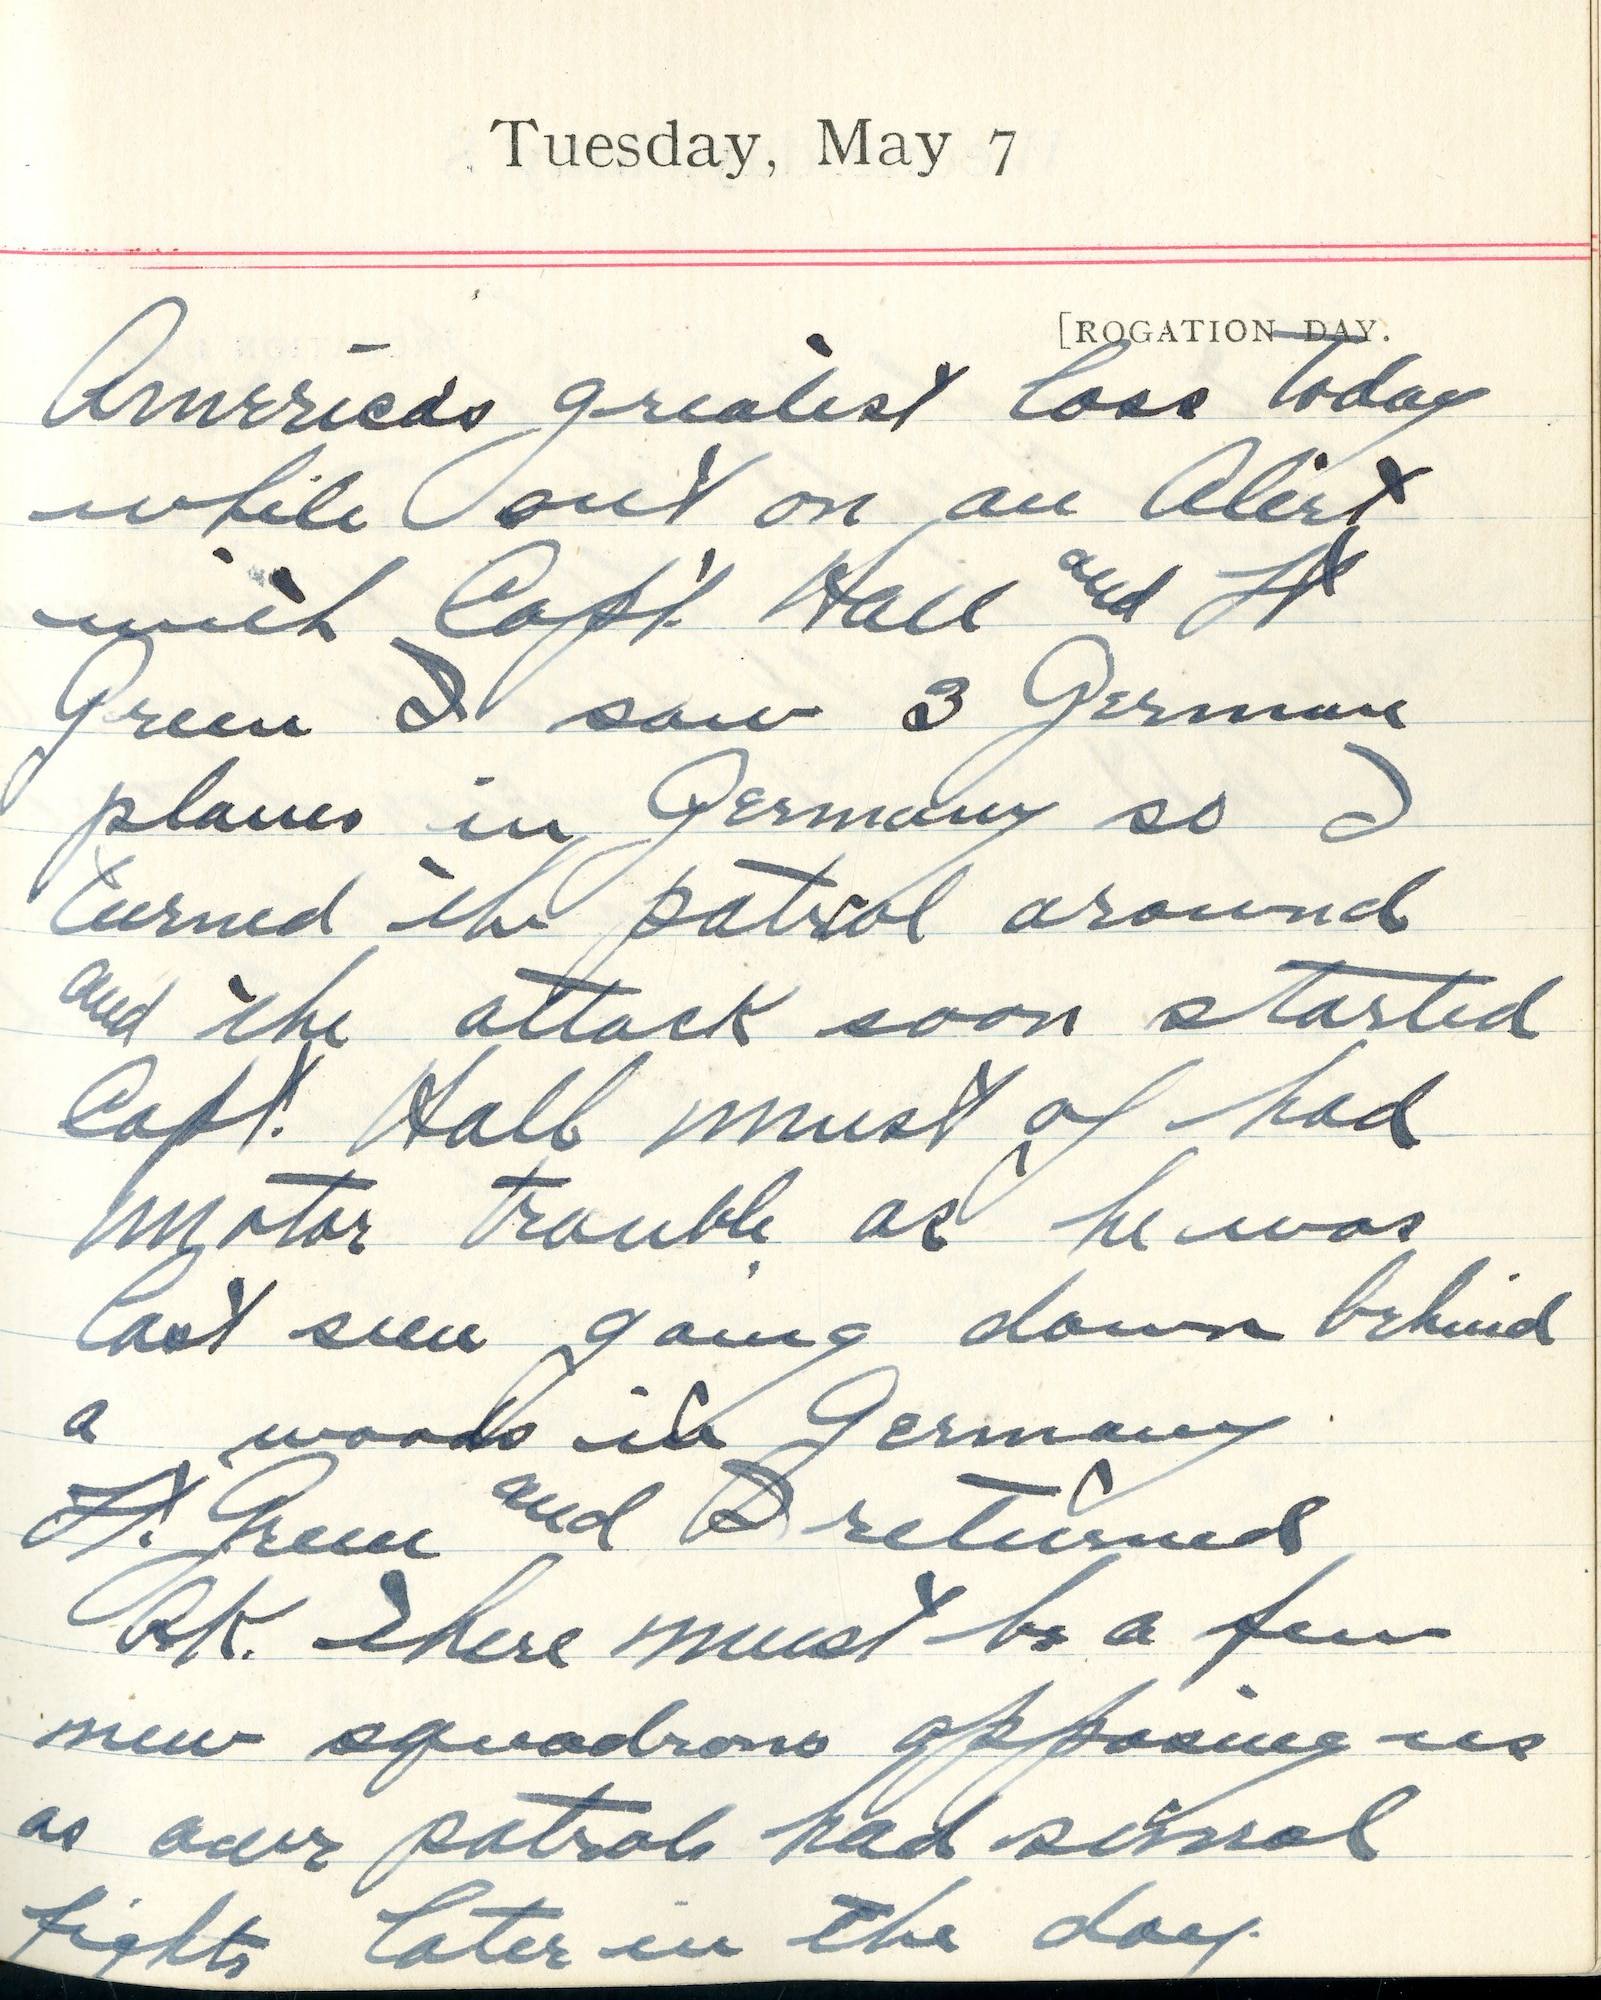 Capt. Edward V. Rickenbacker's 1918 wartime diary entry. (05/07/1918).

America’s greatest loss today while out on alert with Capt. Hall and Lt. [Edwin] Green.  I saw 3 German planes in Germany so I turned the patrol around and the attack soon started.  Capt. Hall must have had motor trouble as he was last seen going down behind a woods in Germany.  Lt. Green and I returned O.K.  There must be a few new squadrons opposing us as our patrols had several fights later in the day.